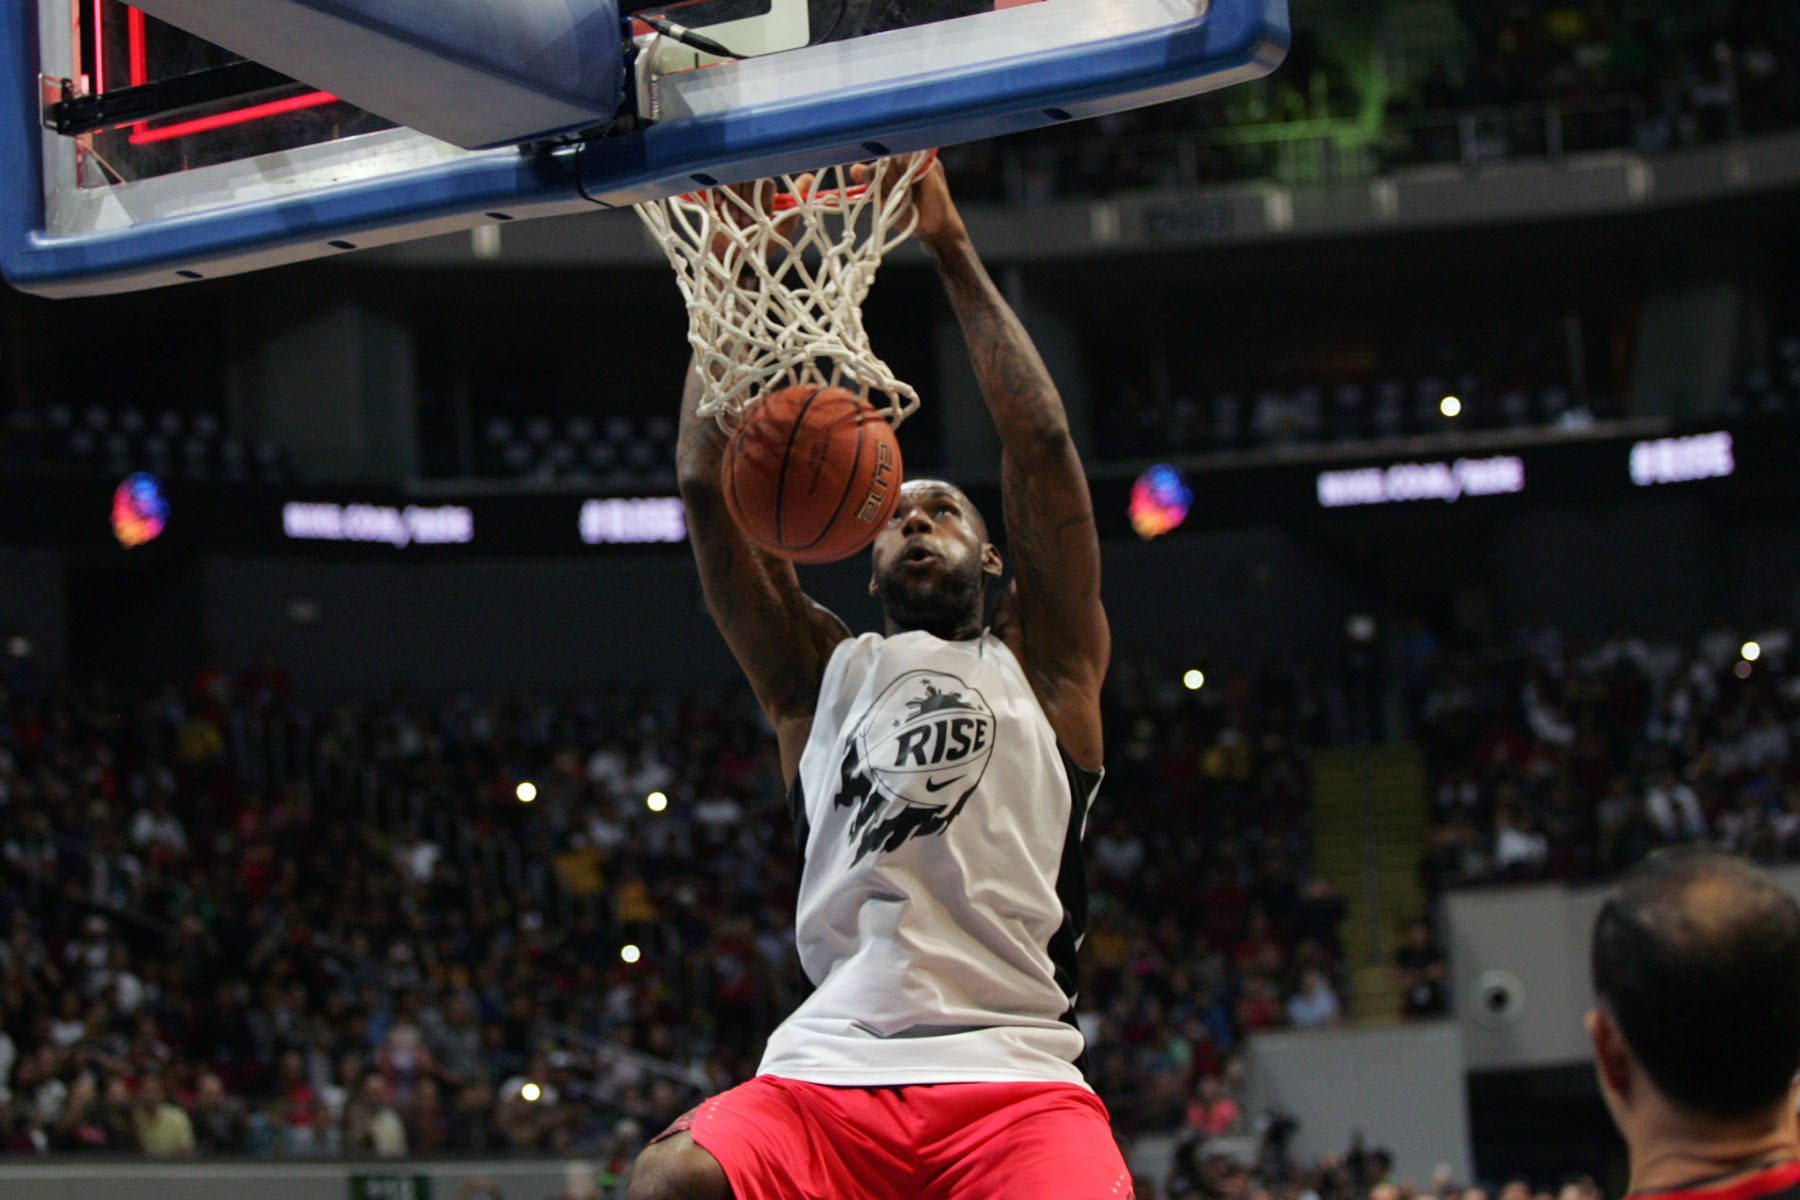 SLAM. And LeBron throws it down low with authority before an ecstatic crowd. Photo by Josh Albelda/Rappler 